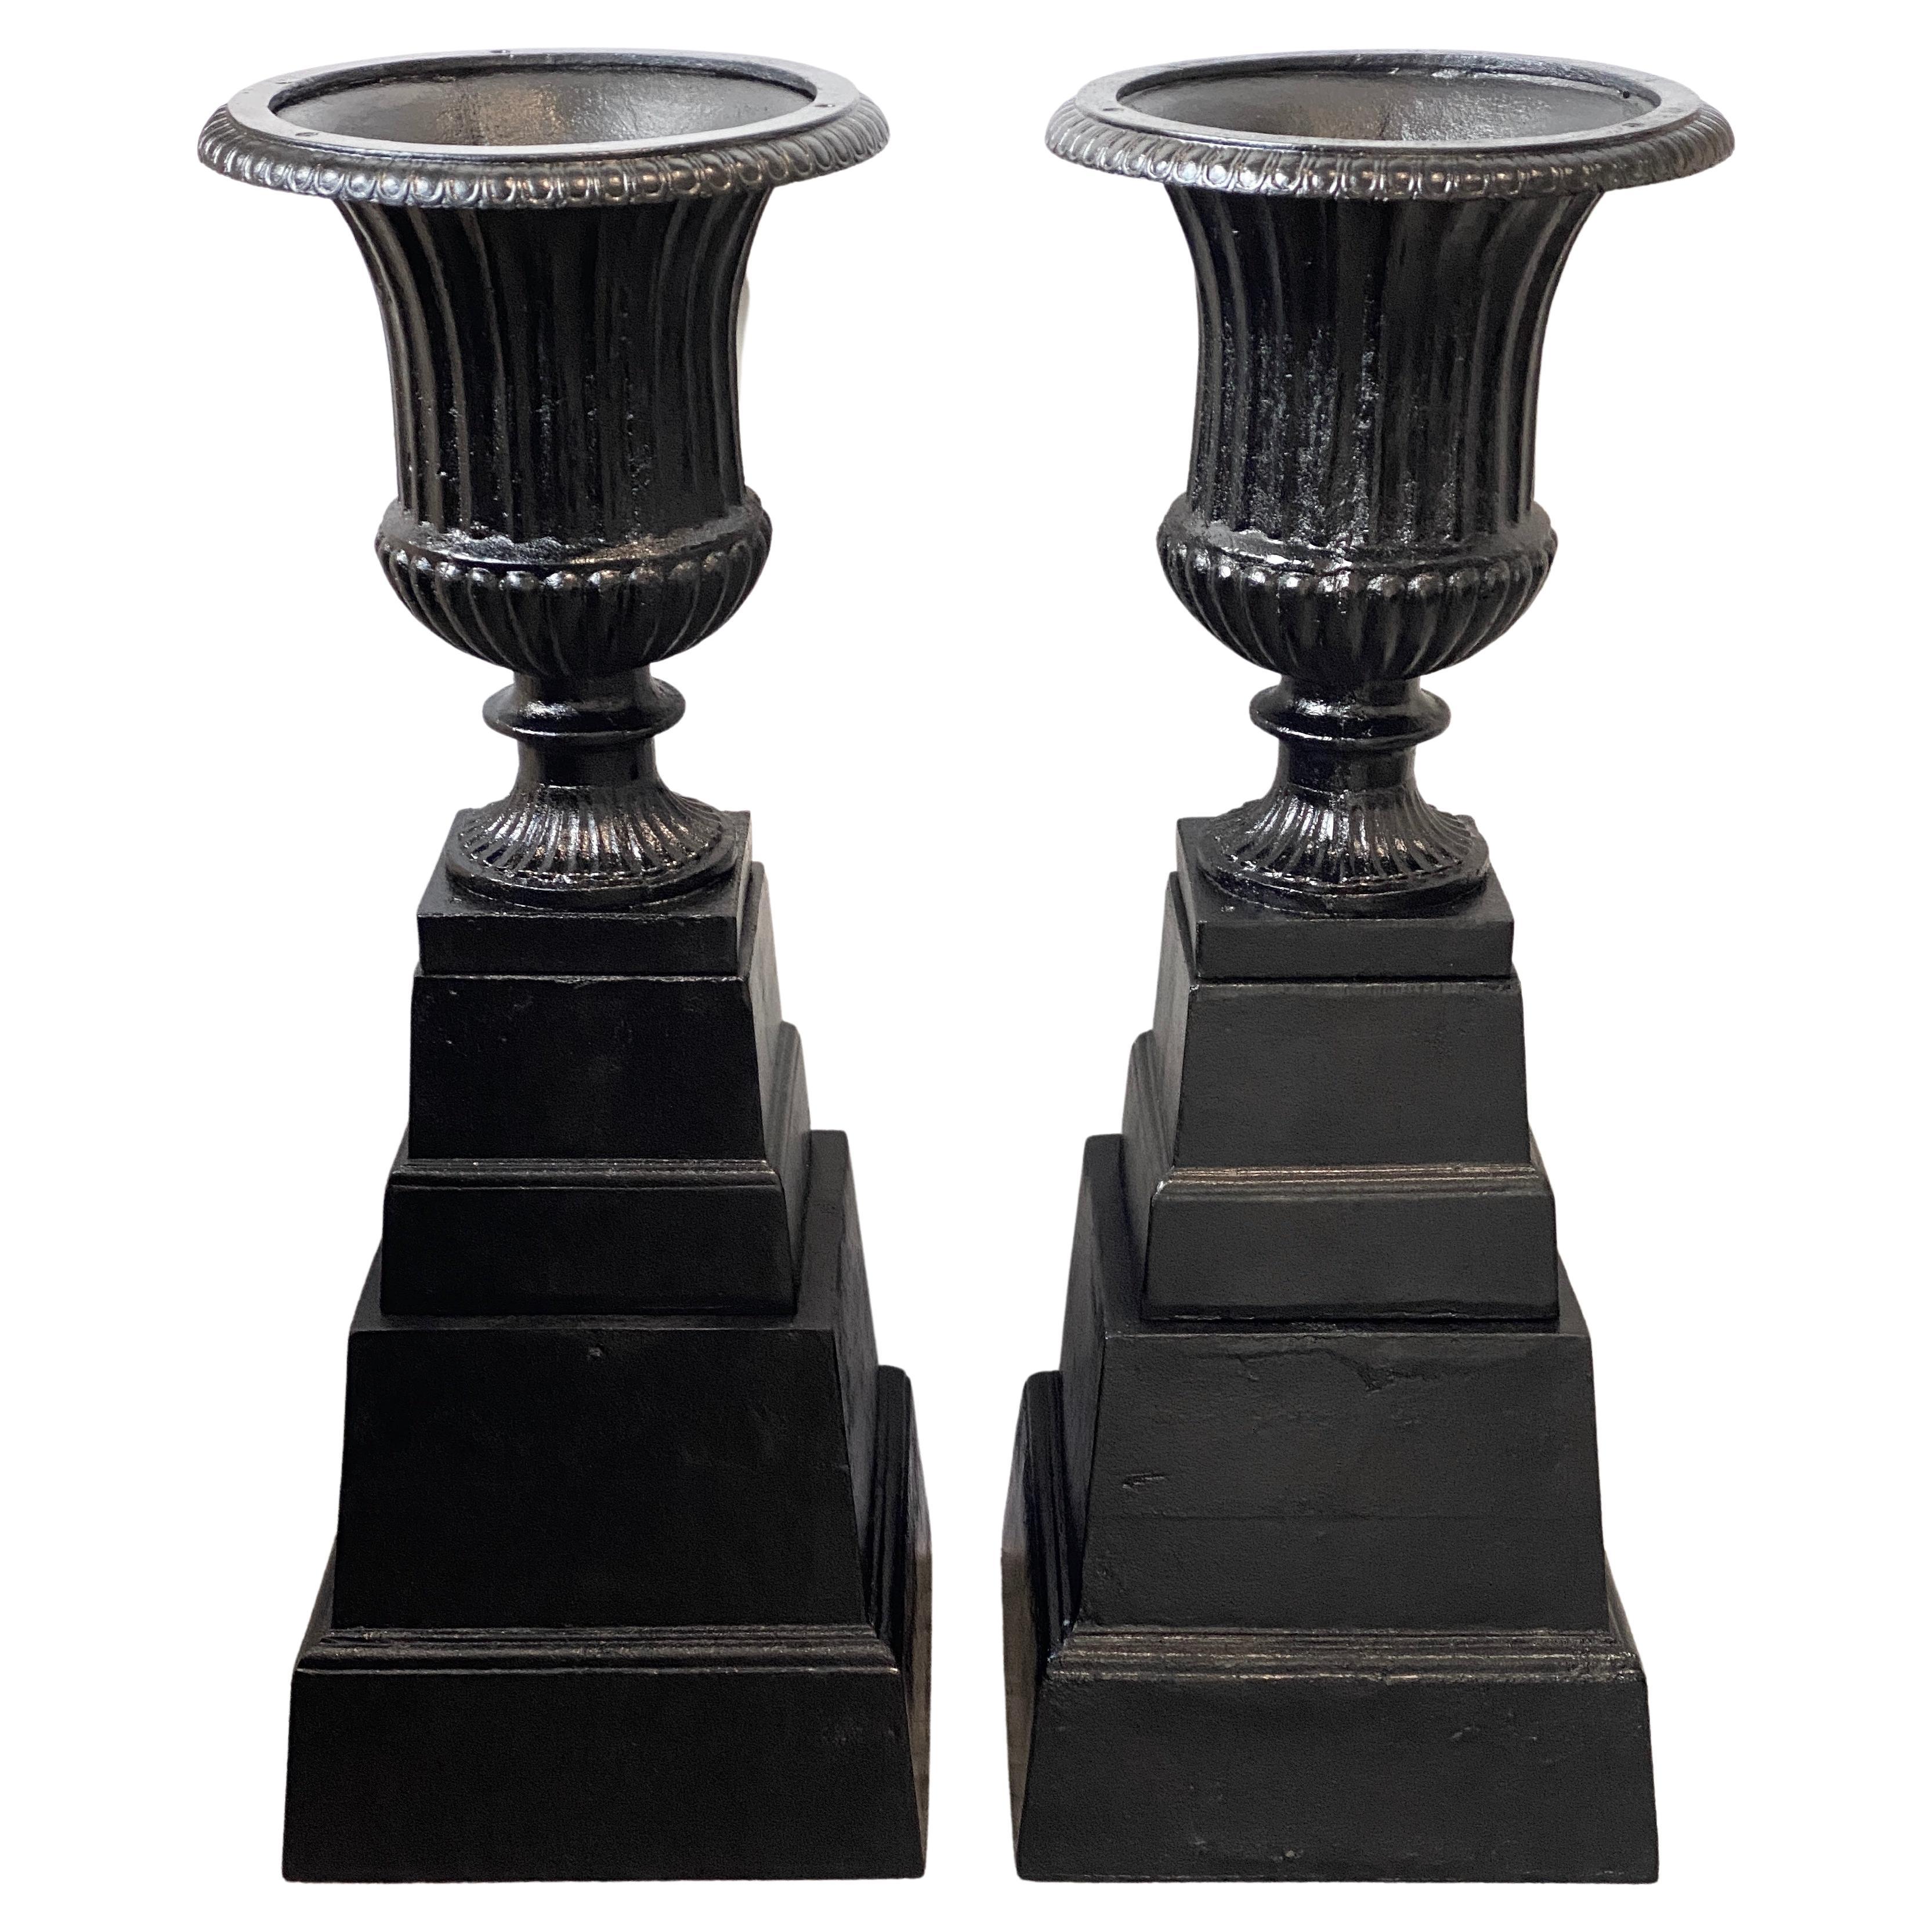 Pair of Regency Style Garden Urns on Stand